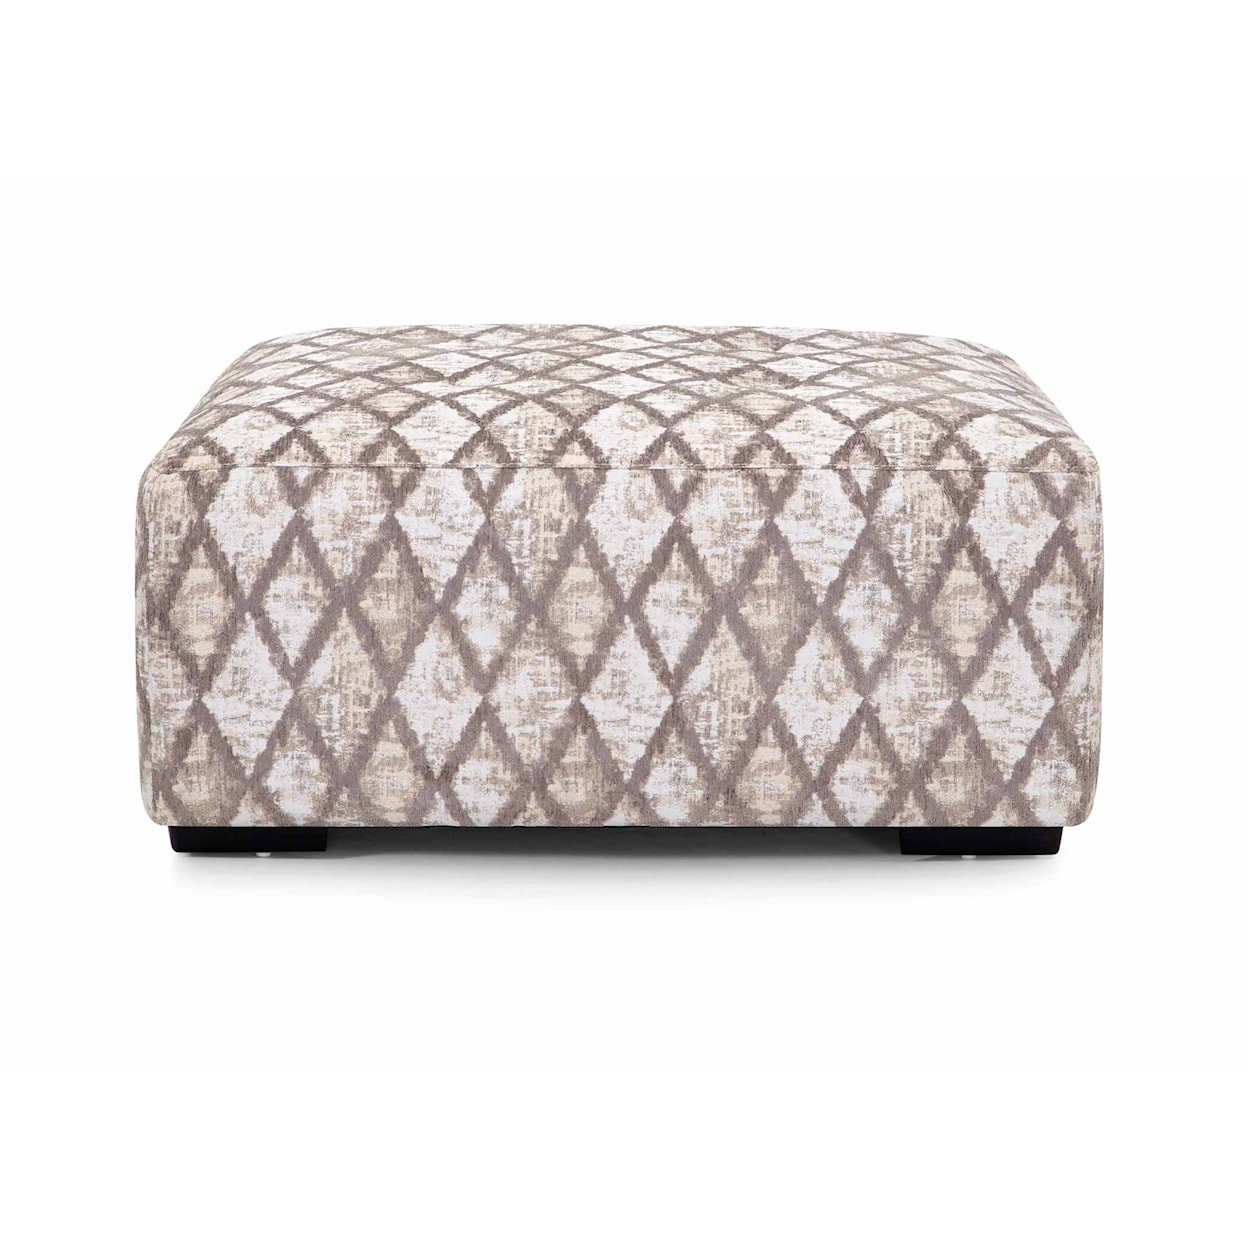 Franklin 973 Lizette Square Ottoman with Button Tufts